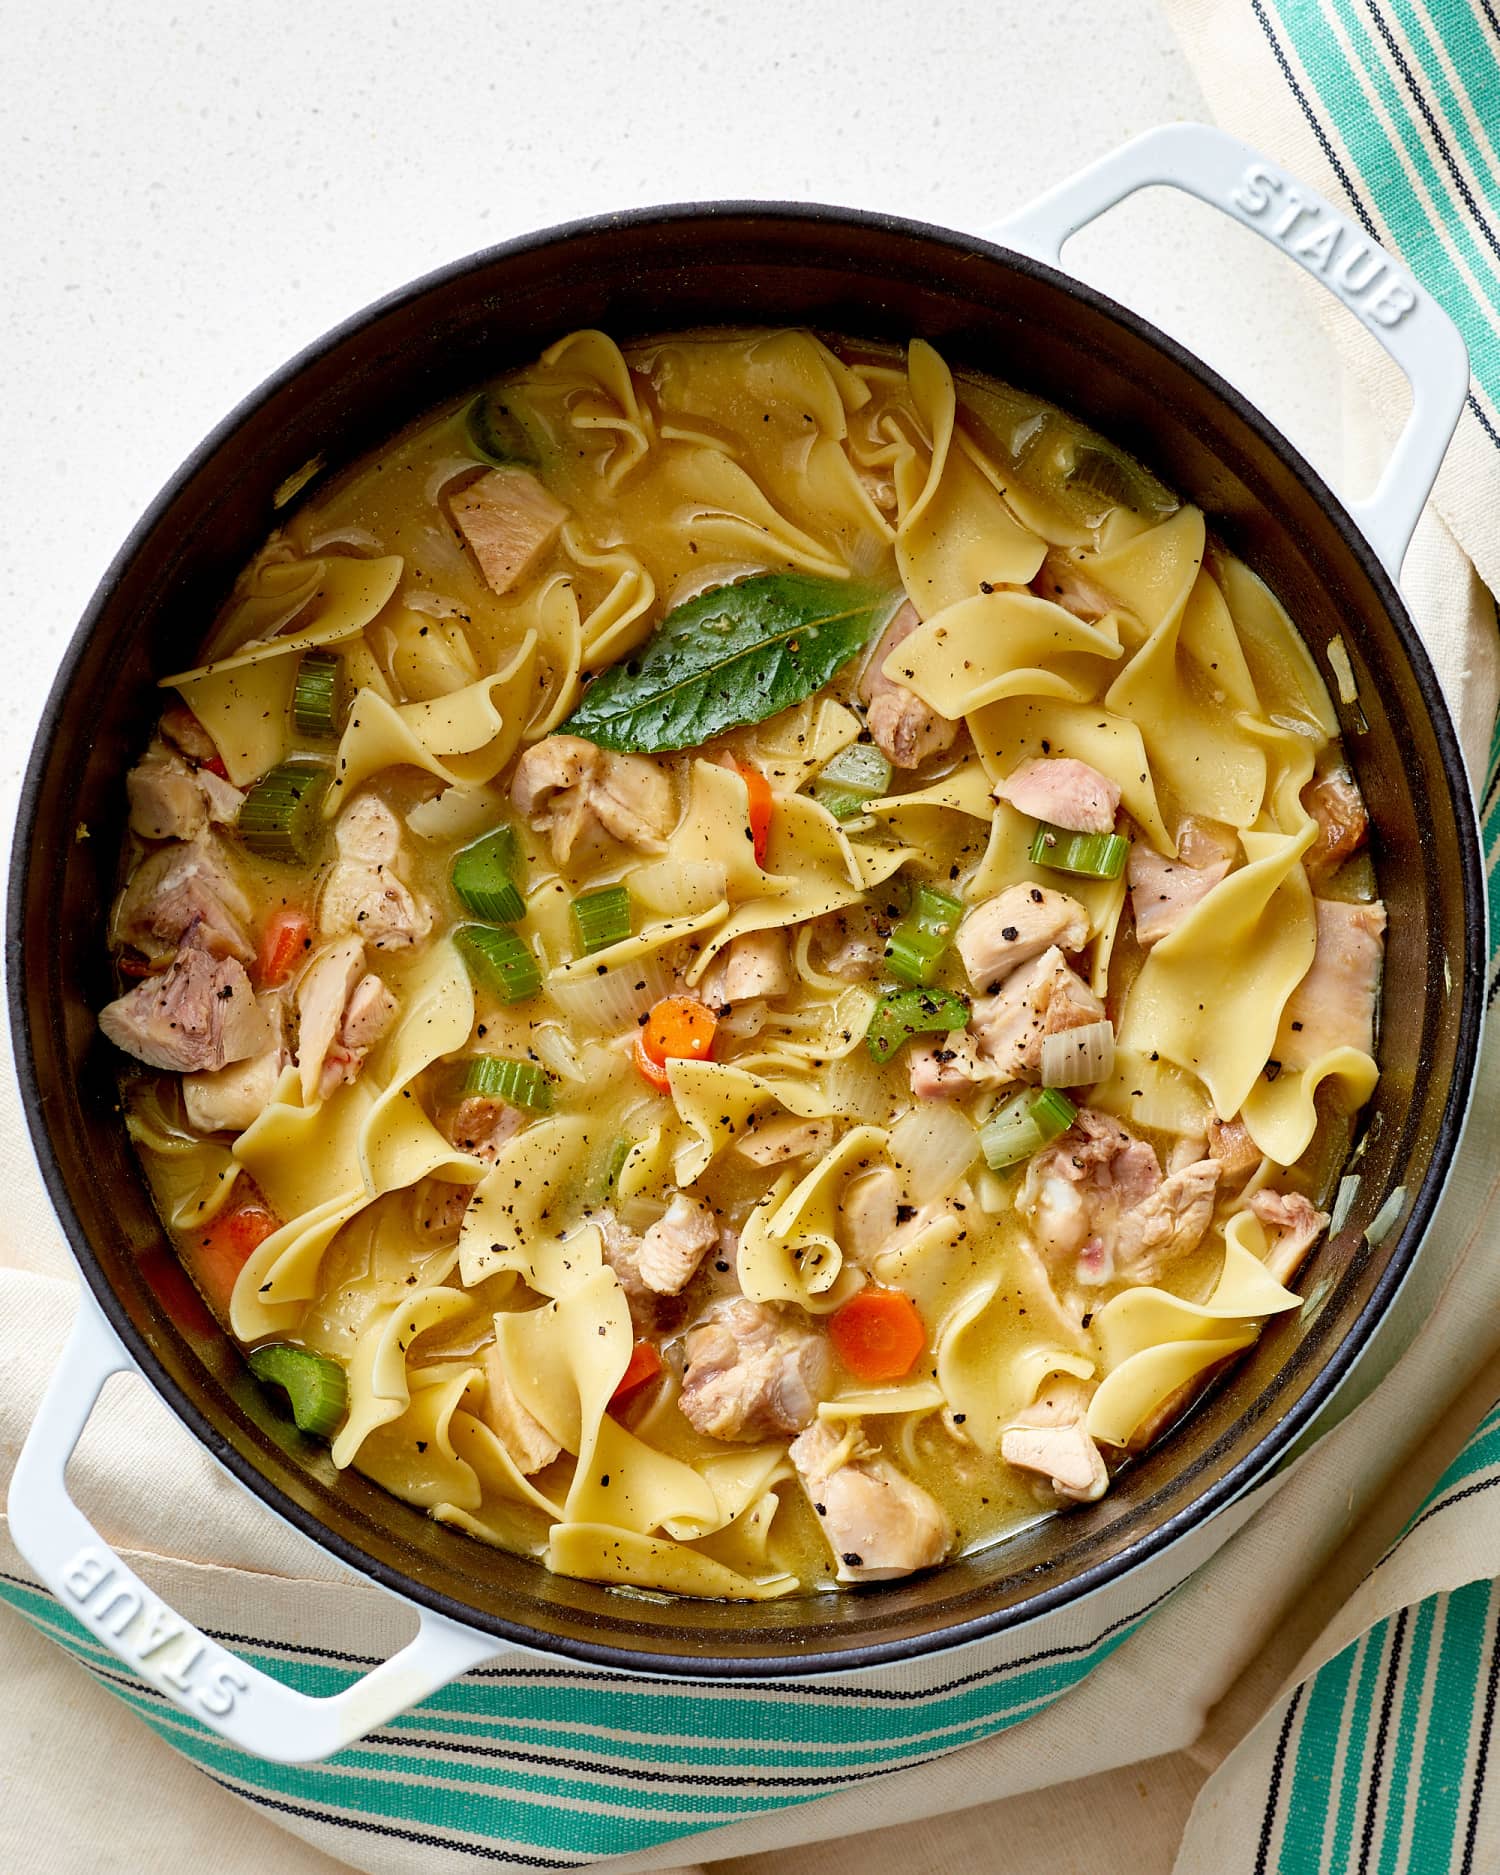 How To Make the Best Chicken Noodle Soup